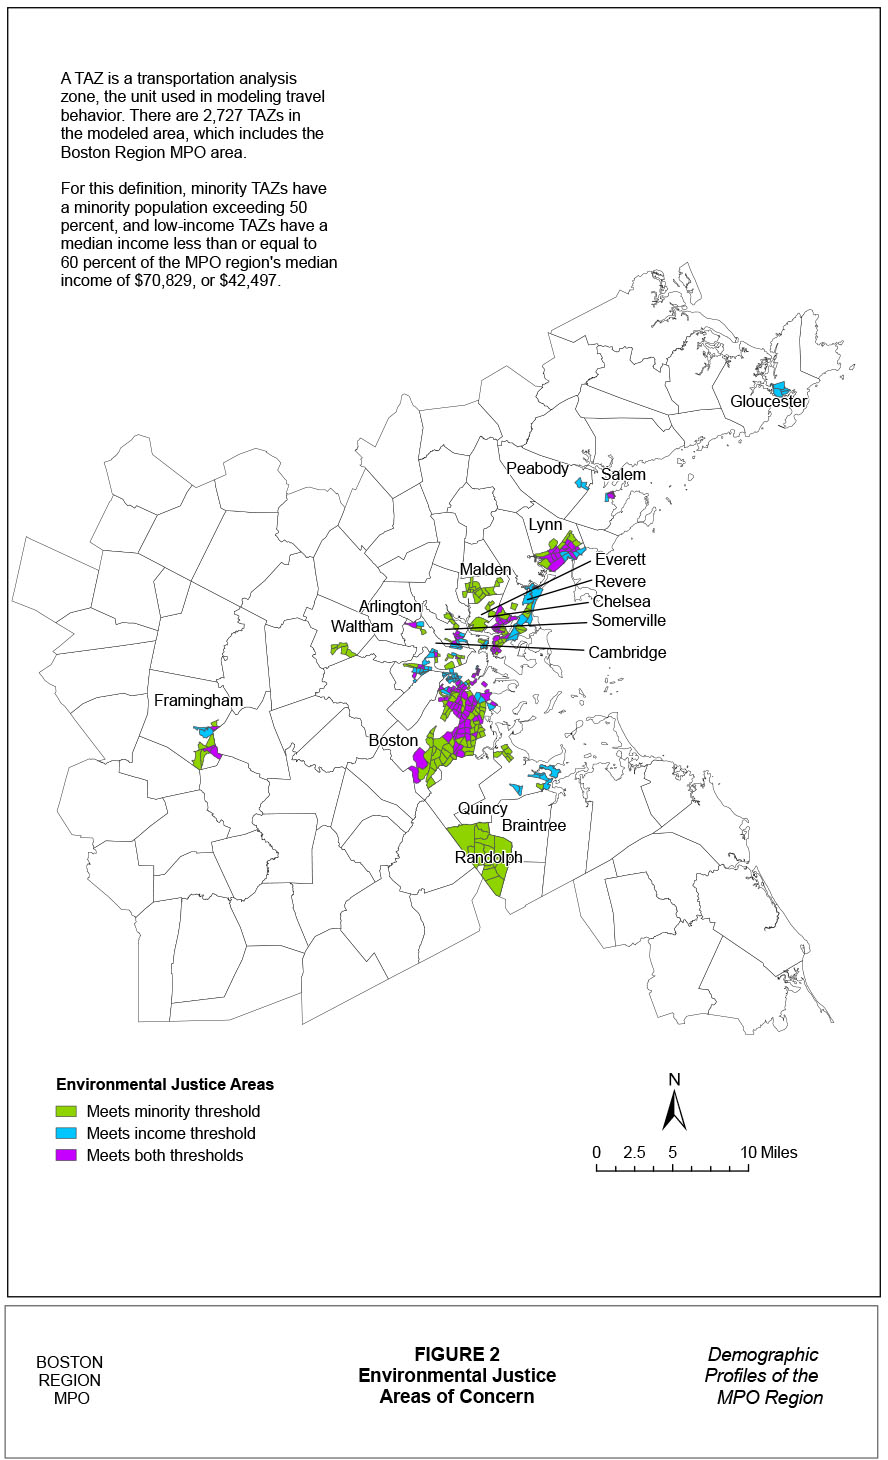 This figure is a map titled “Environmental Justice Areas of Concern.” In the corner of the figure, there are explanations of what a TAZ is and of how the Boston Region MPO defines a minority TAZ and how it defines a low-income TAZ. A TAZ is a transportation analysis zone, the unit used in modeling travel behavior. There are 2,727 TAZs in the MPO’s modeled area, which includes the Boston Region MPO area. The Boston Region MPO defines a minority TAZ as one that has a minority population exceeding 27.8 percent, which is the Boston Region MPO average, and a low-income TAZ as one that has a median income less than or equal to 60 percent of the MPO region's median income of $70,829, or $42,497. The map uses colors to show on the map which TAZs are environmental justice areas, and which of those areas meet the minority threshold, which meet the income threshold, and which meet both threshold.